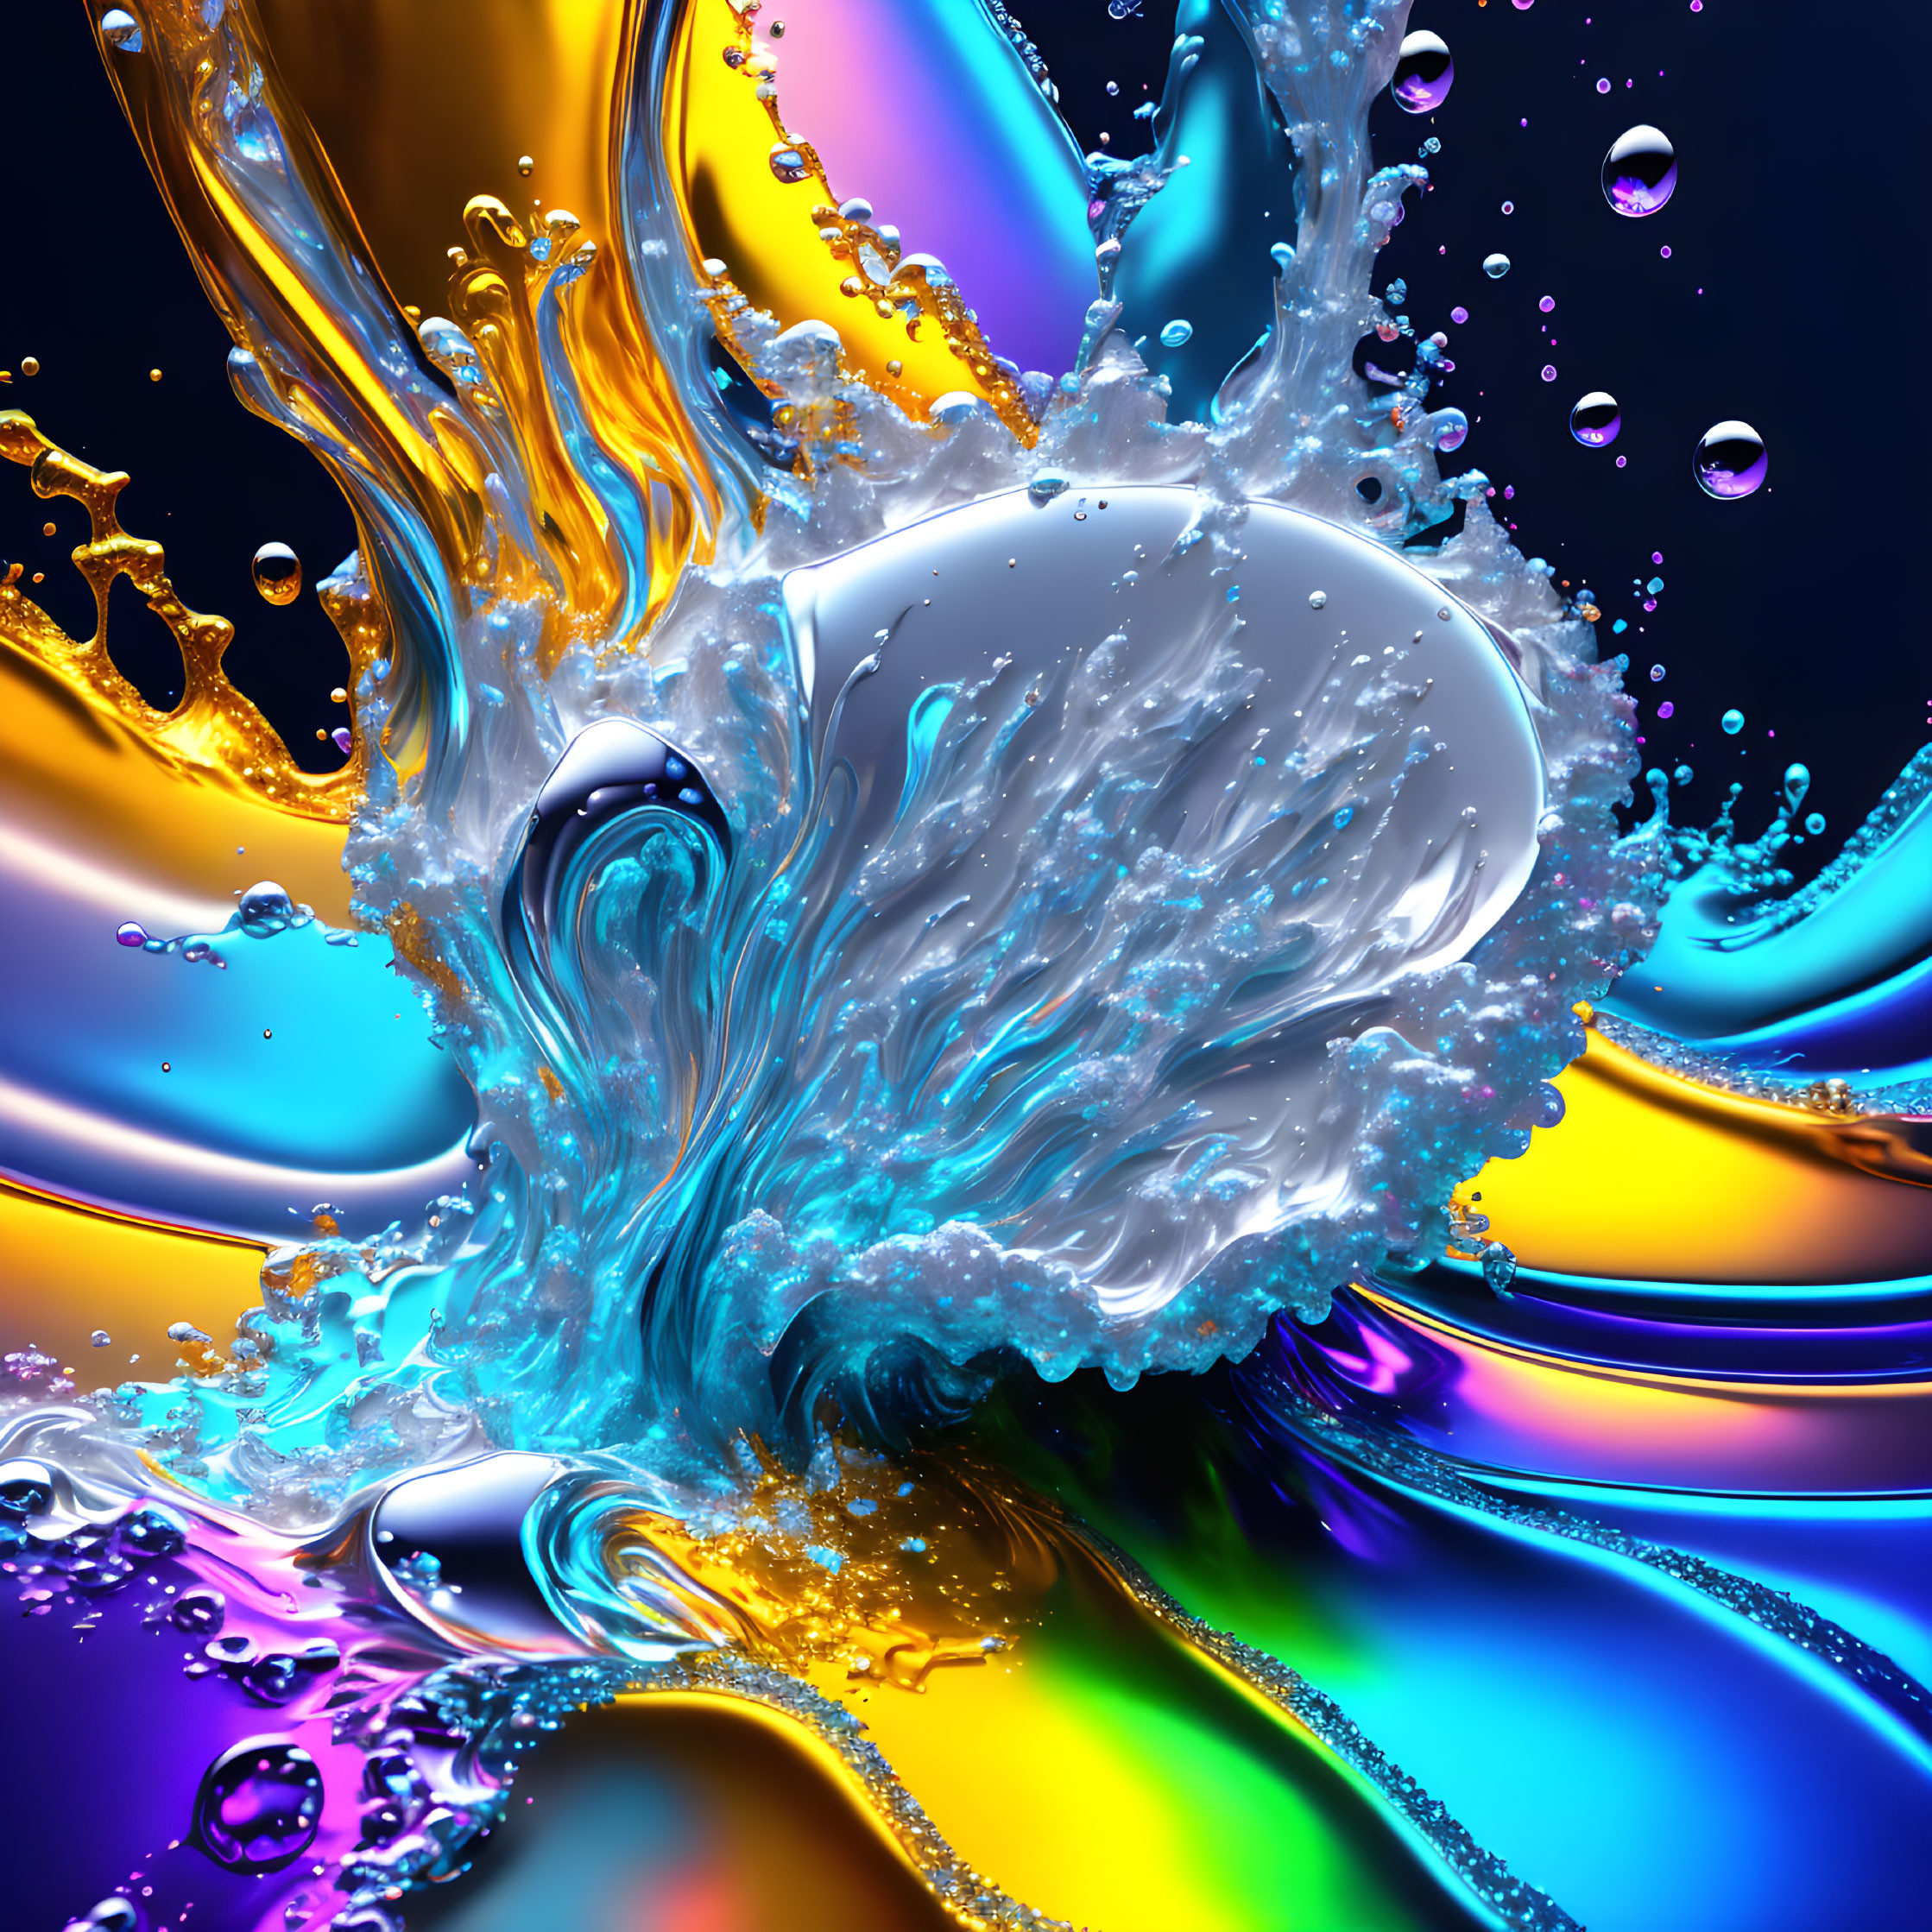 Colorful Abstract Water Splash Art with Reflective Surfaces and Swirling Patterns